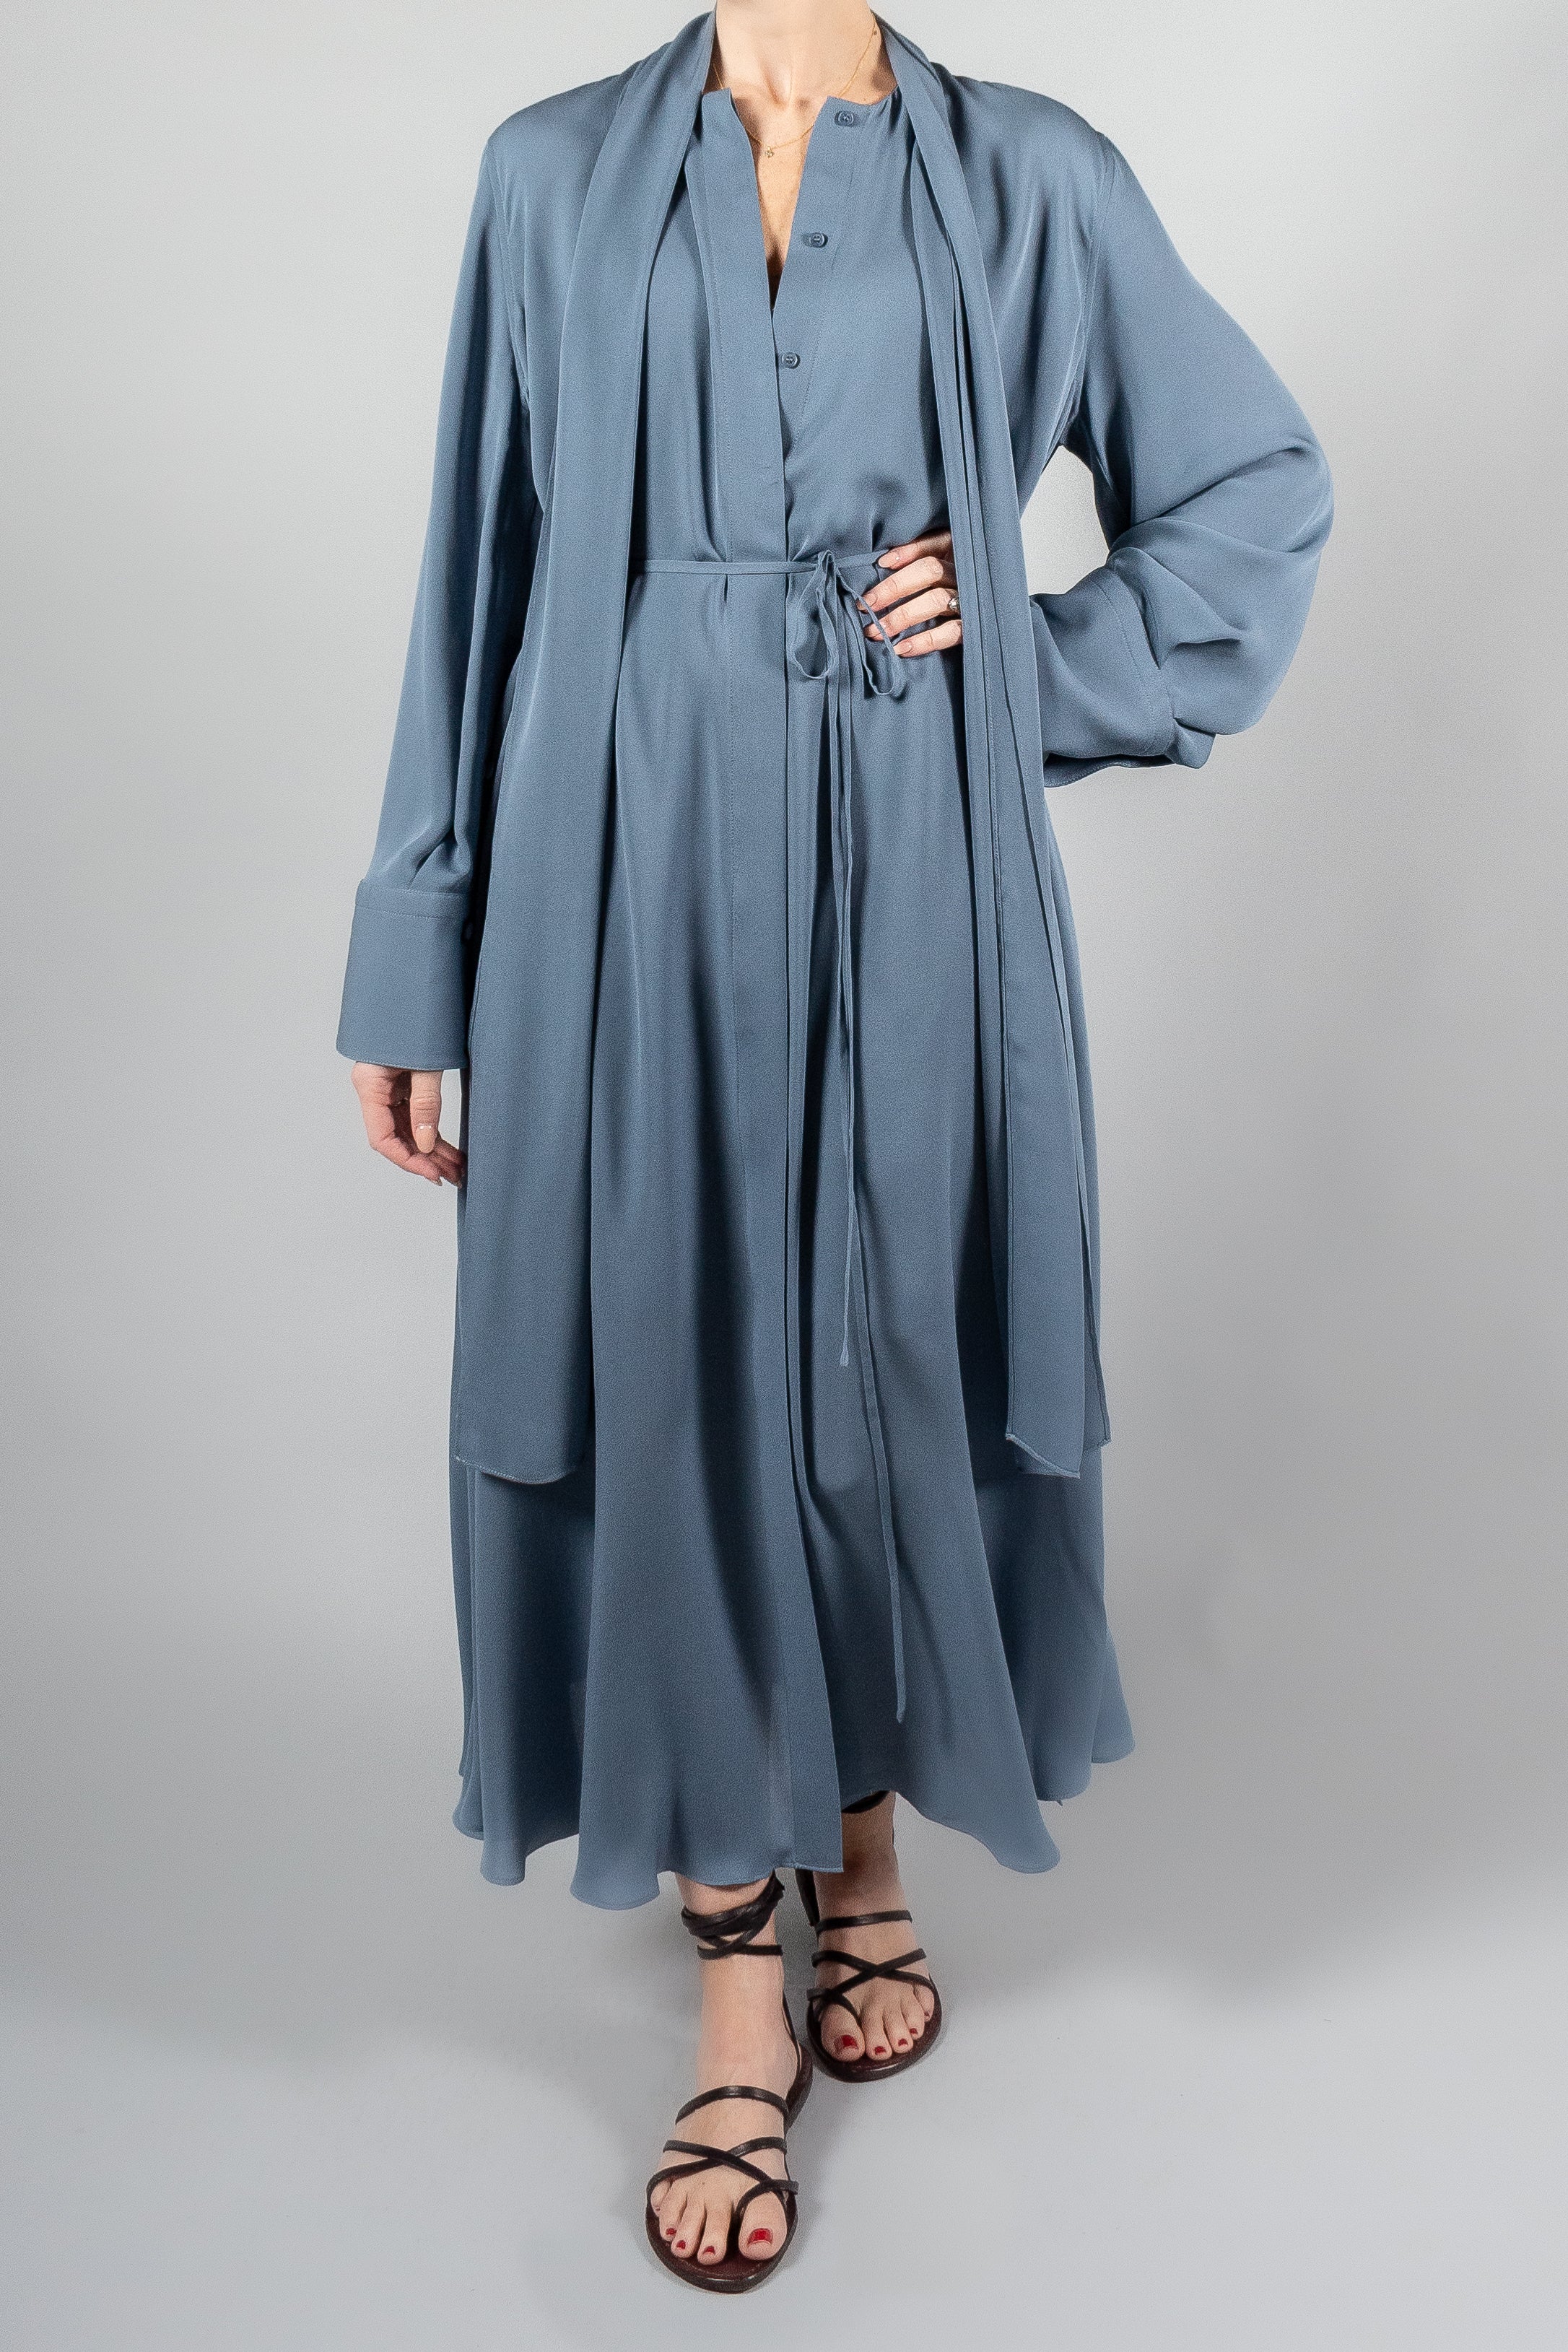 Heirlome Joanna Dress-Dresses and Jumpsuits-Misch-Boutique-Vancouver-Canada-misch.ca